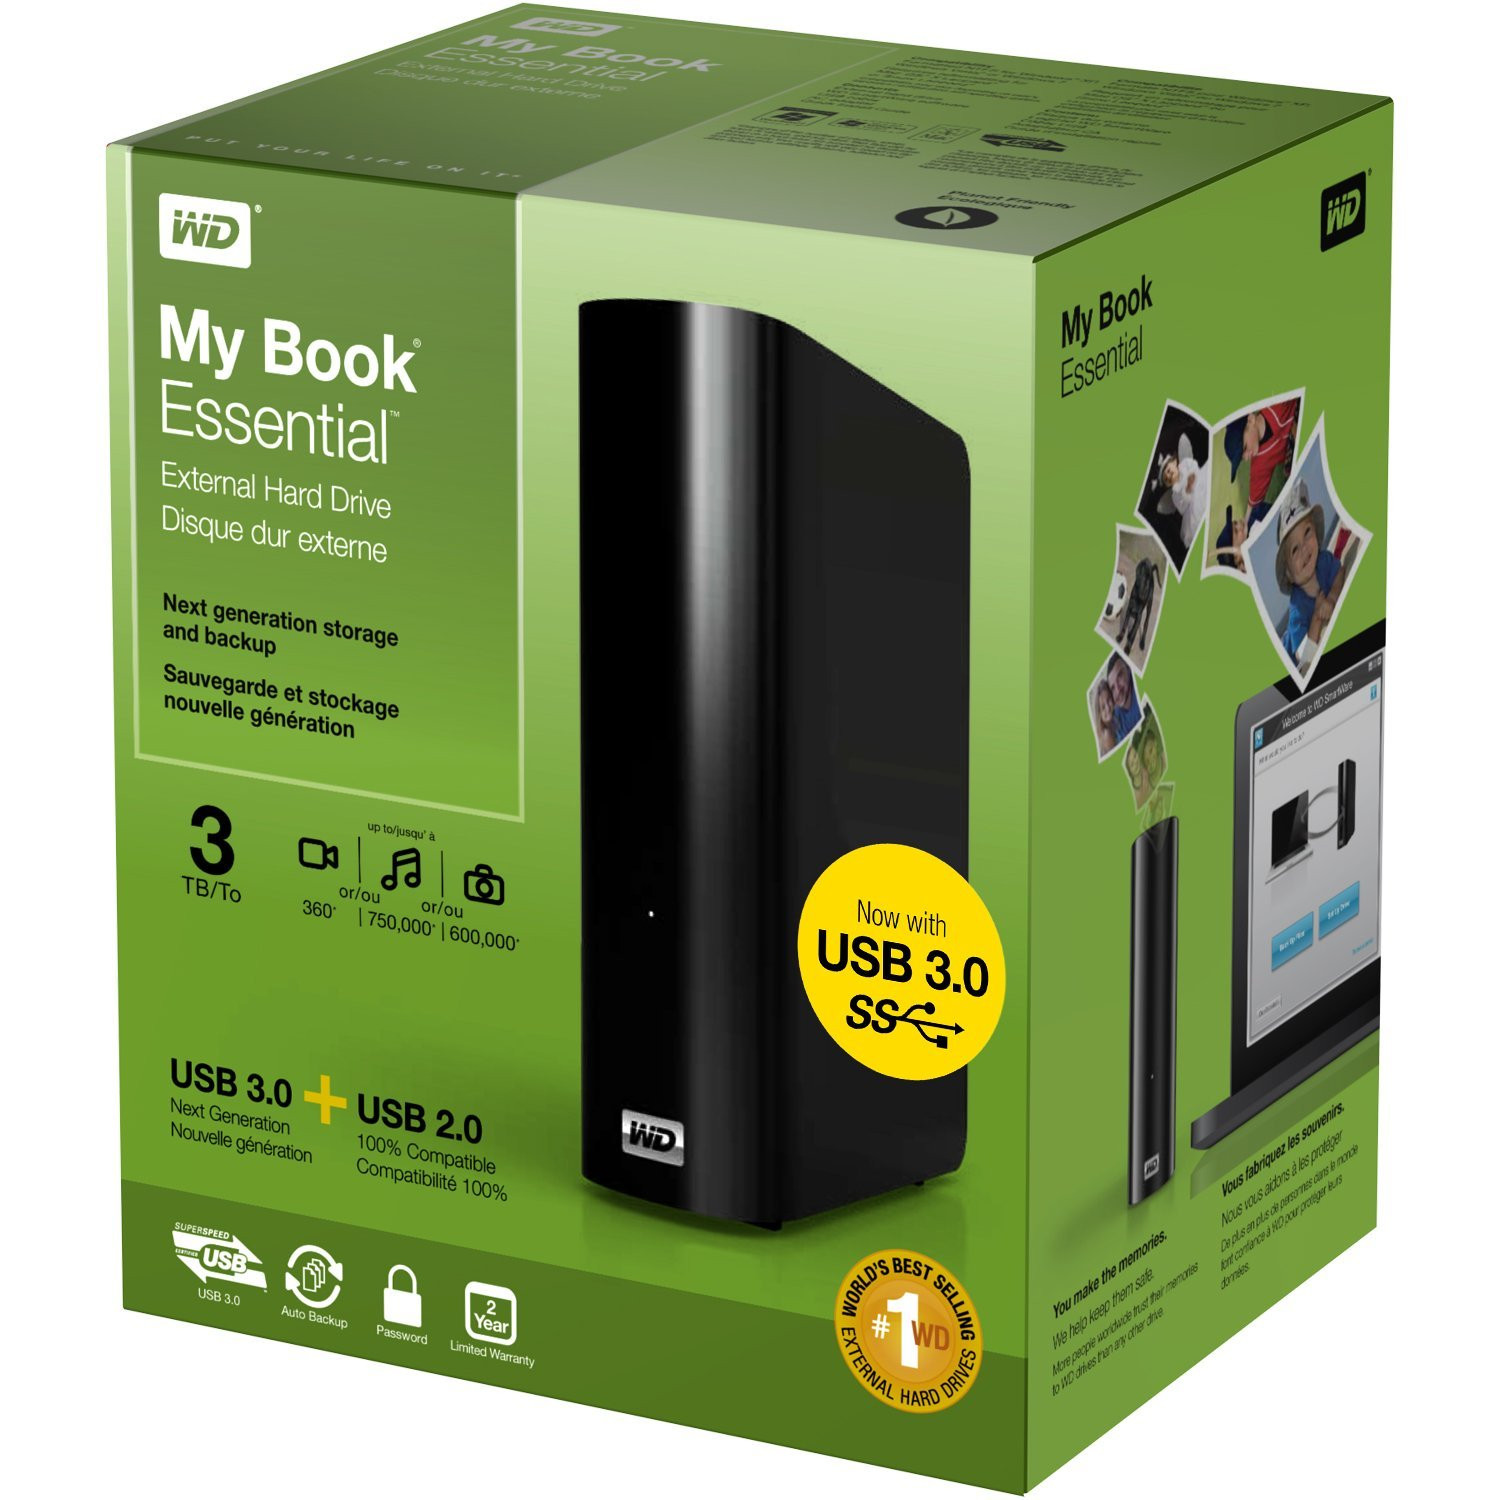 Wd My Book Essential 1tb Repair Holosercruise